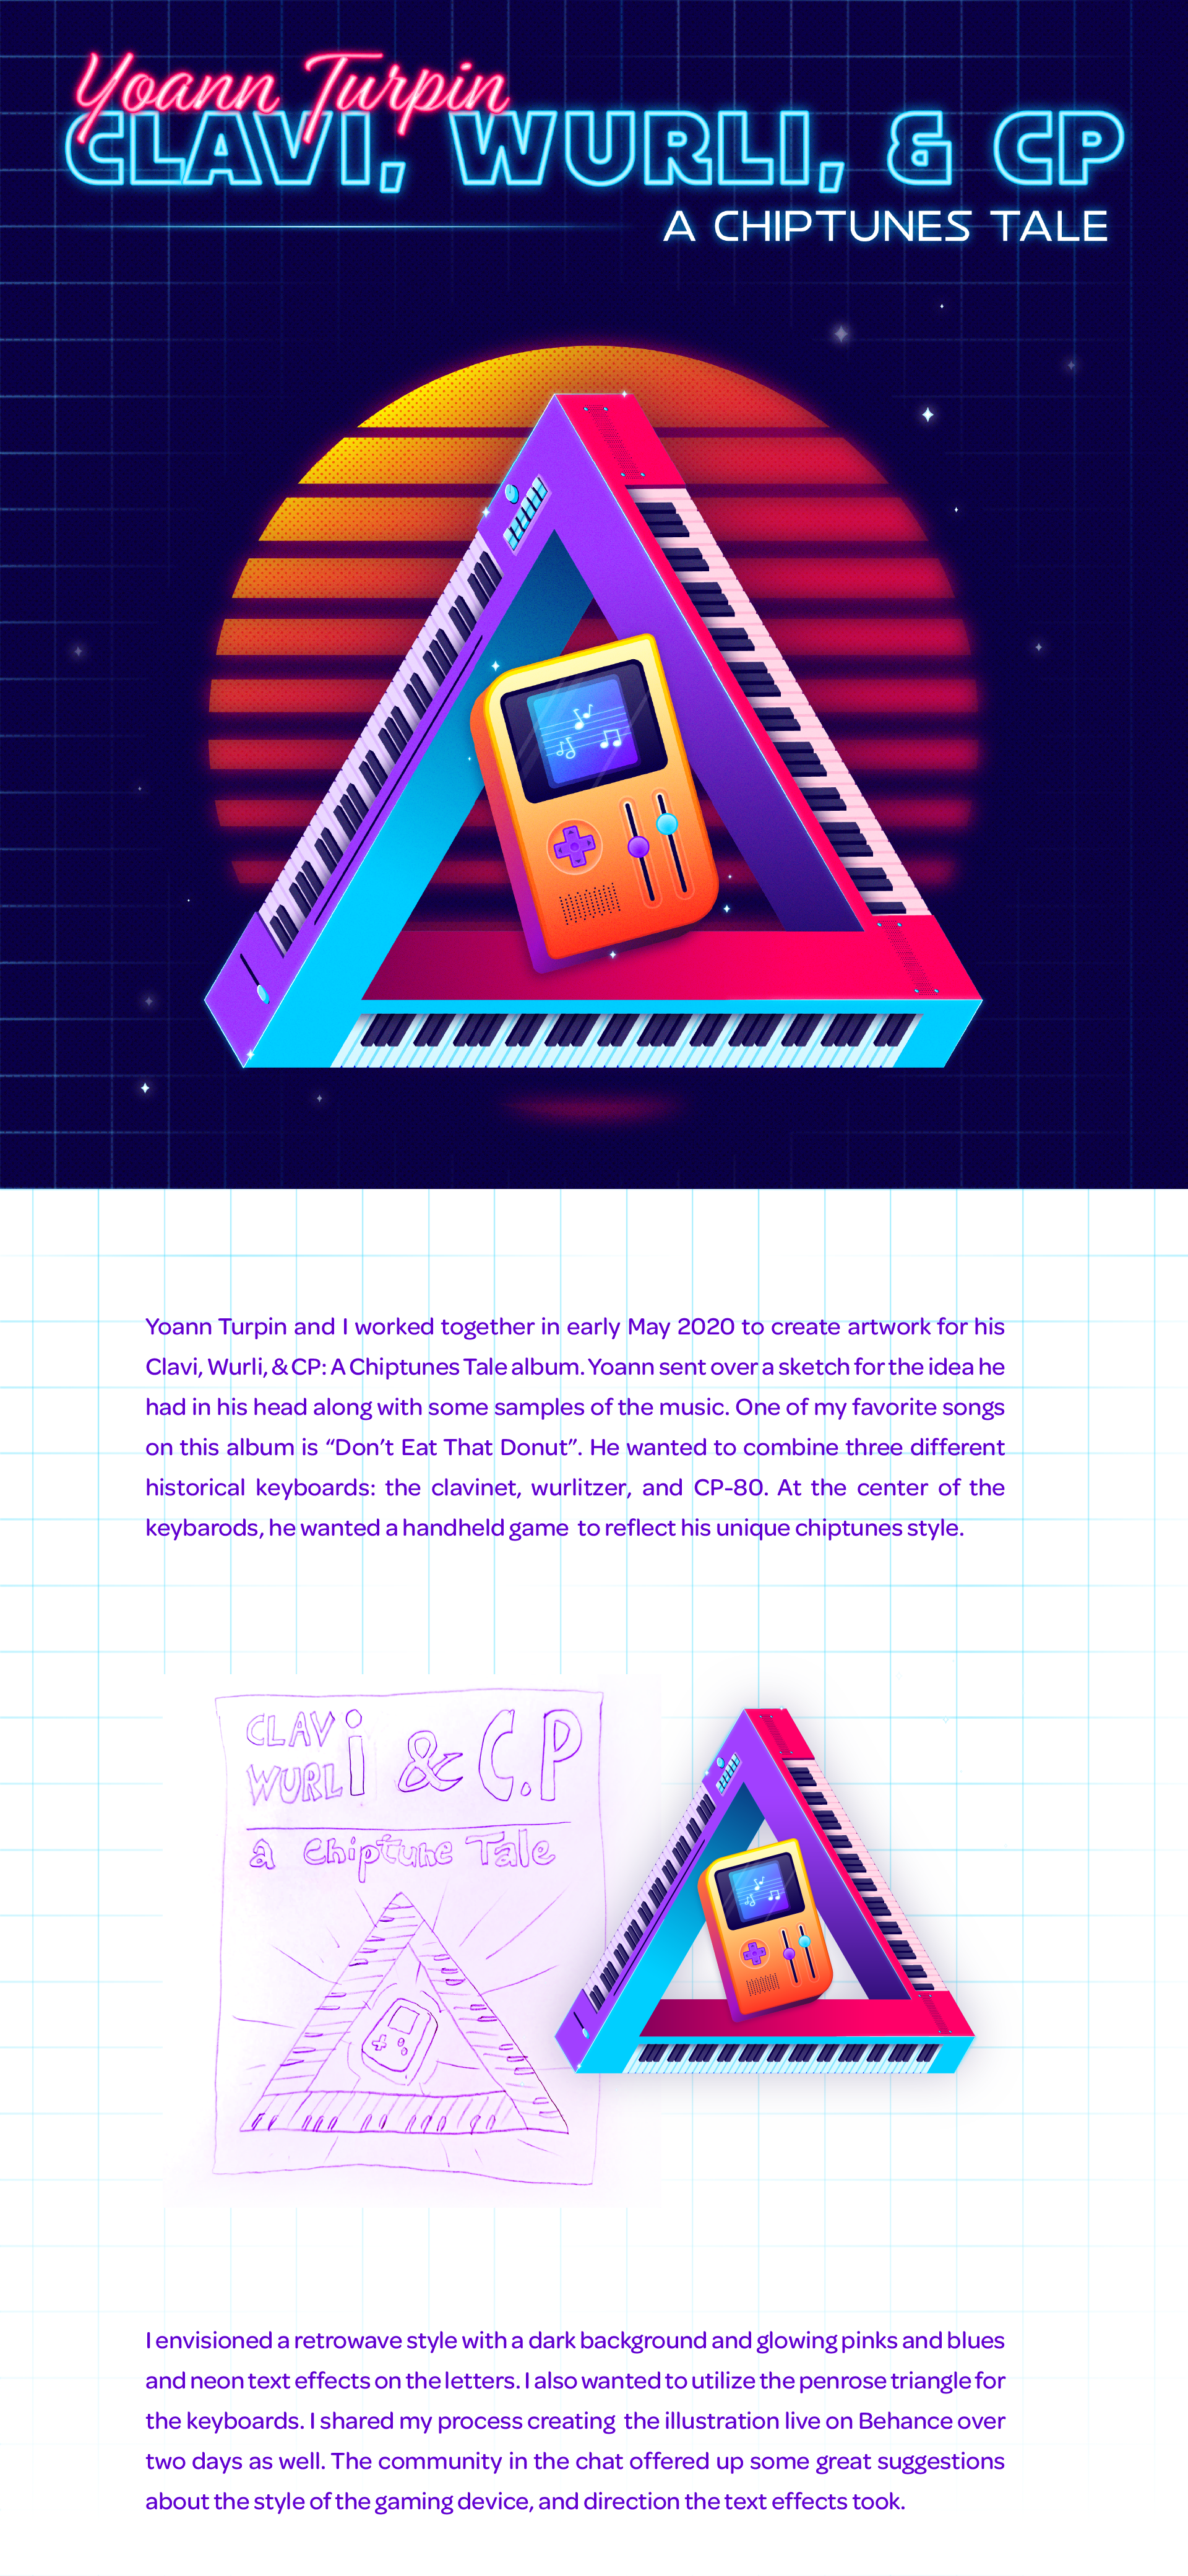 The album cover as described above. Below is the sketch next to the finished penrose triangle keyboard.